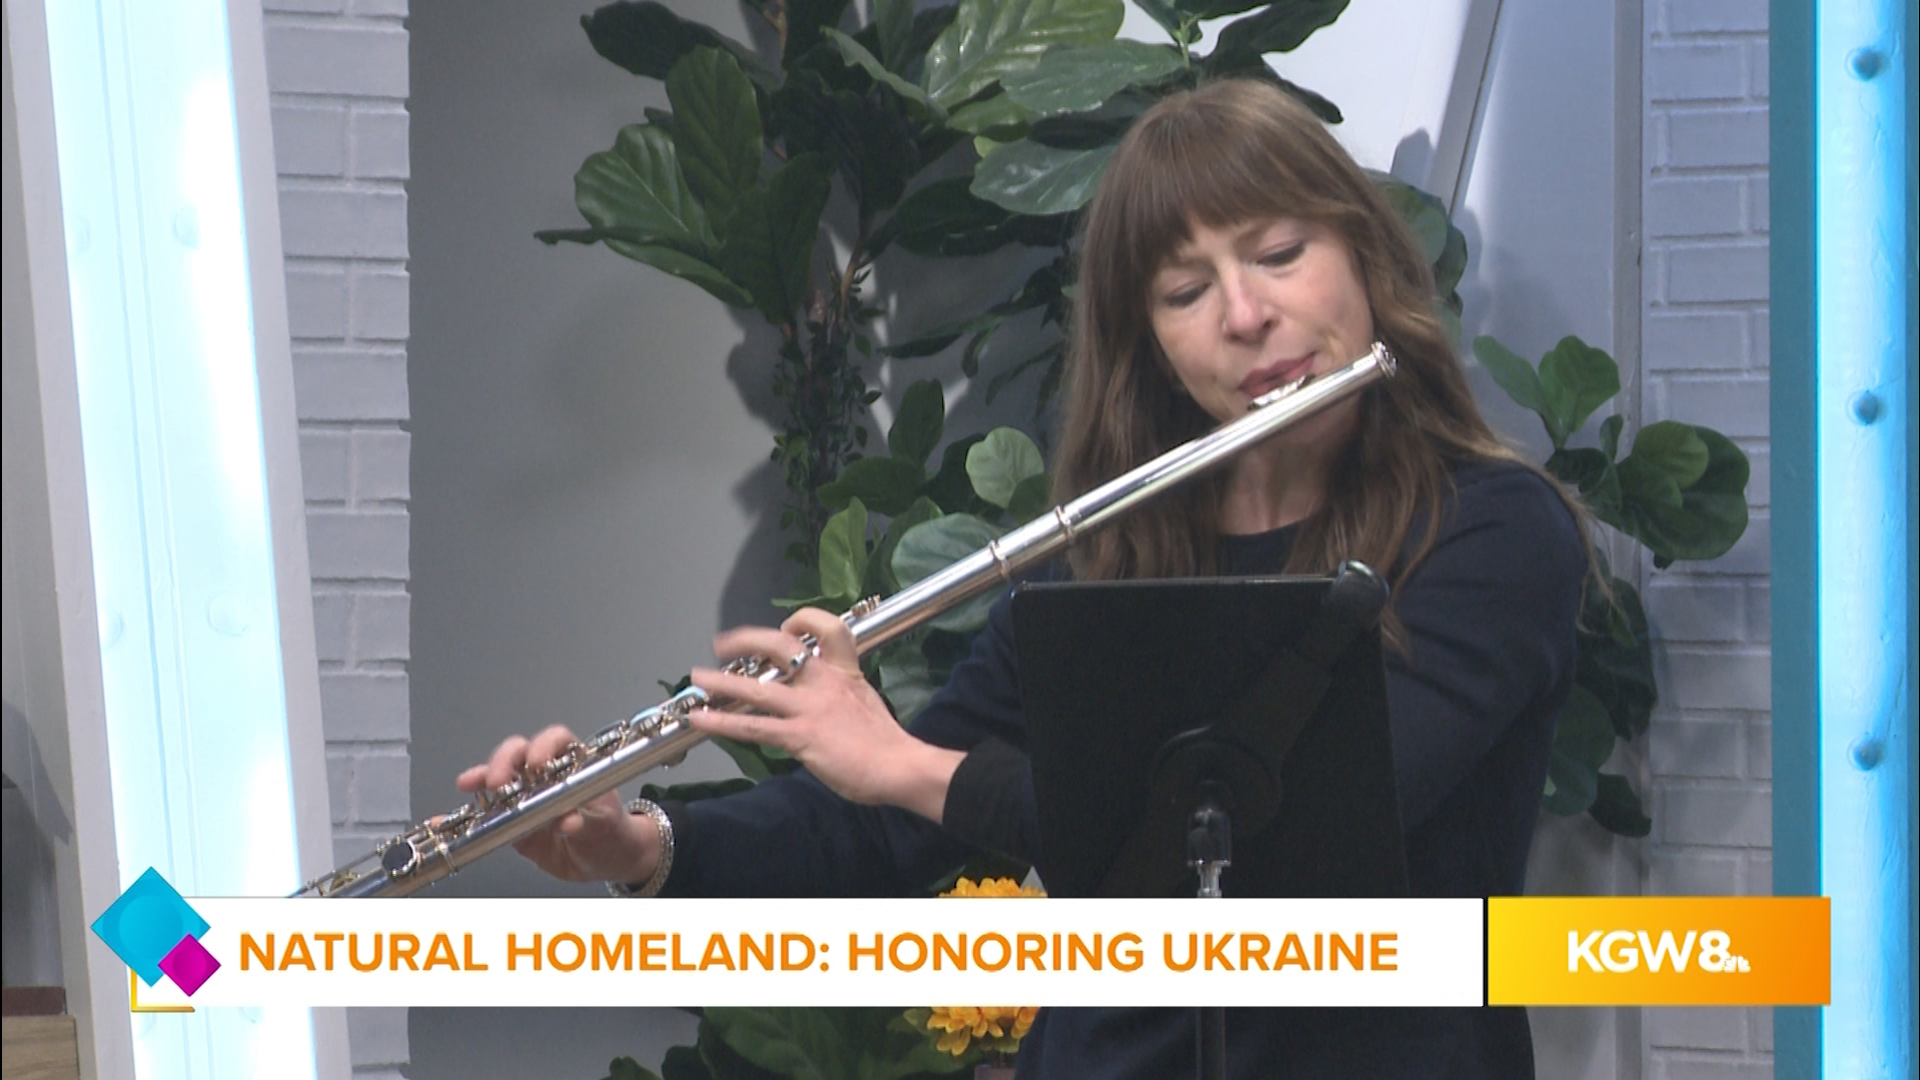 Natural Homeland: Honoring Ukraine is a multi-media concert Thursday, April 6th at the Alberta Rose Theater